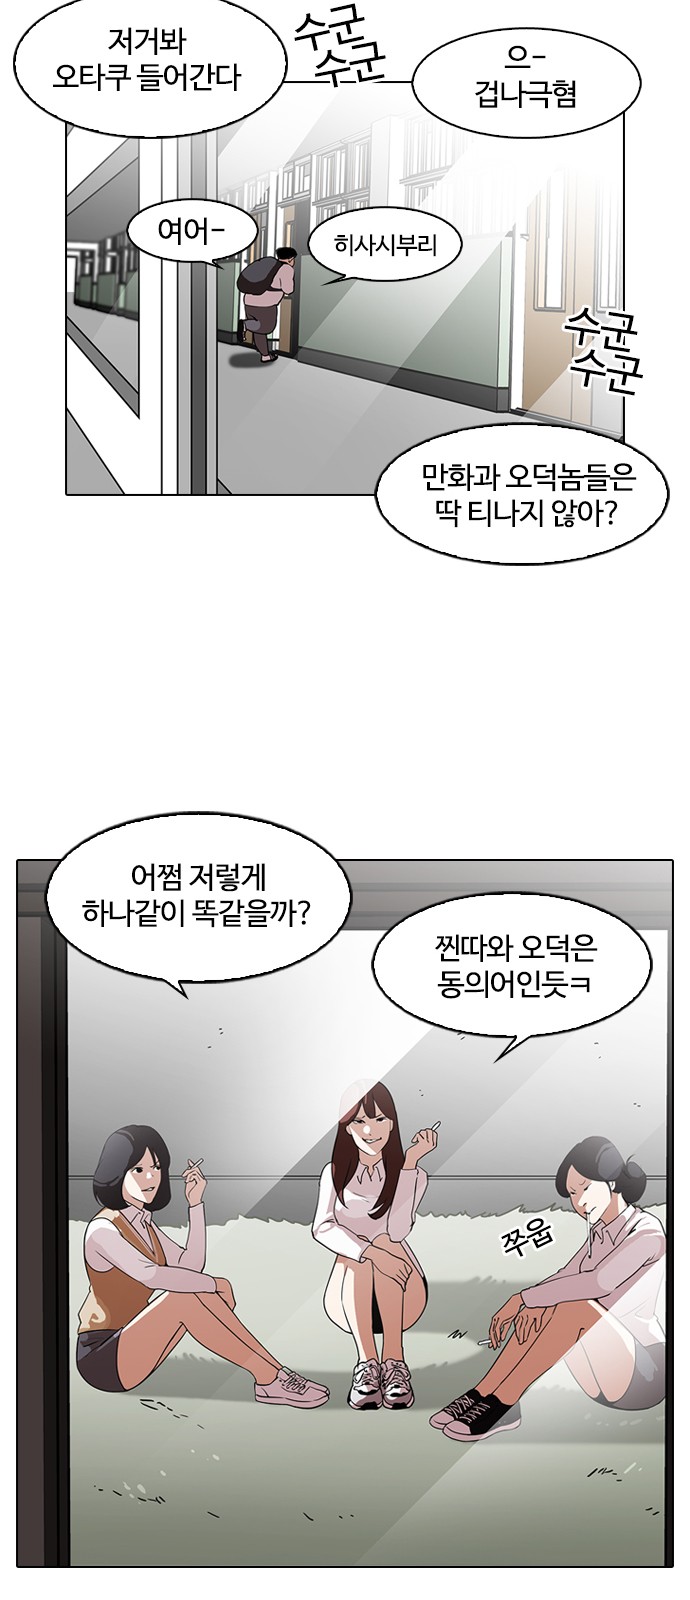 Lookism - Chapter 129 - Page 2